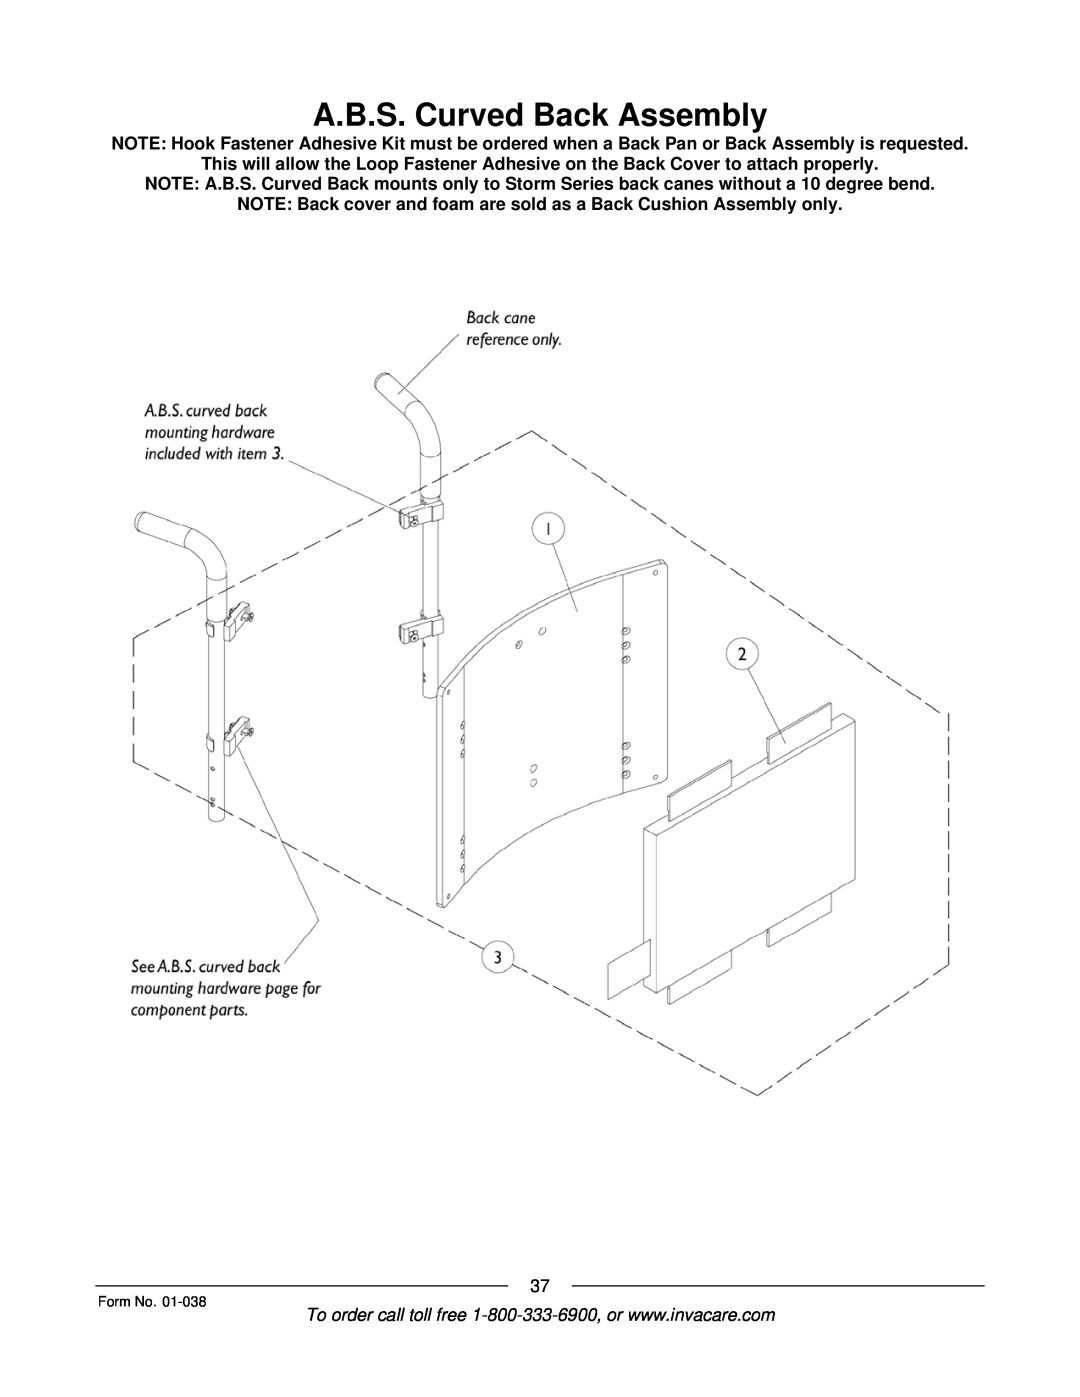 Invacare PTO-STM, ESS-PTO manual A.B.S. Curved Back Assembly 